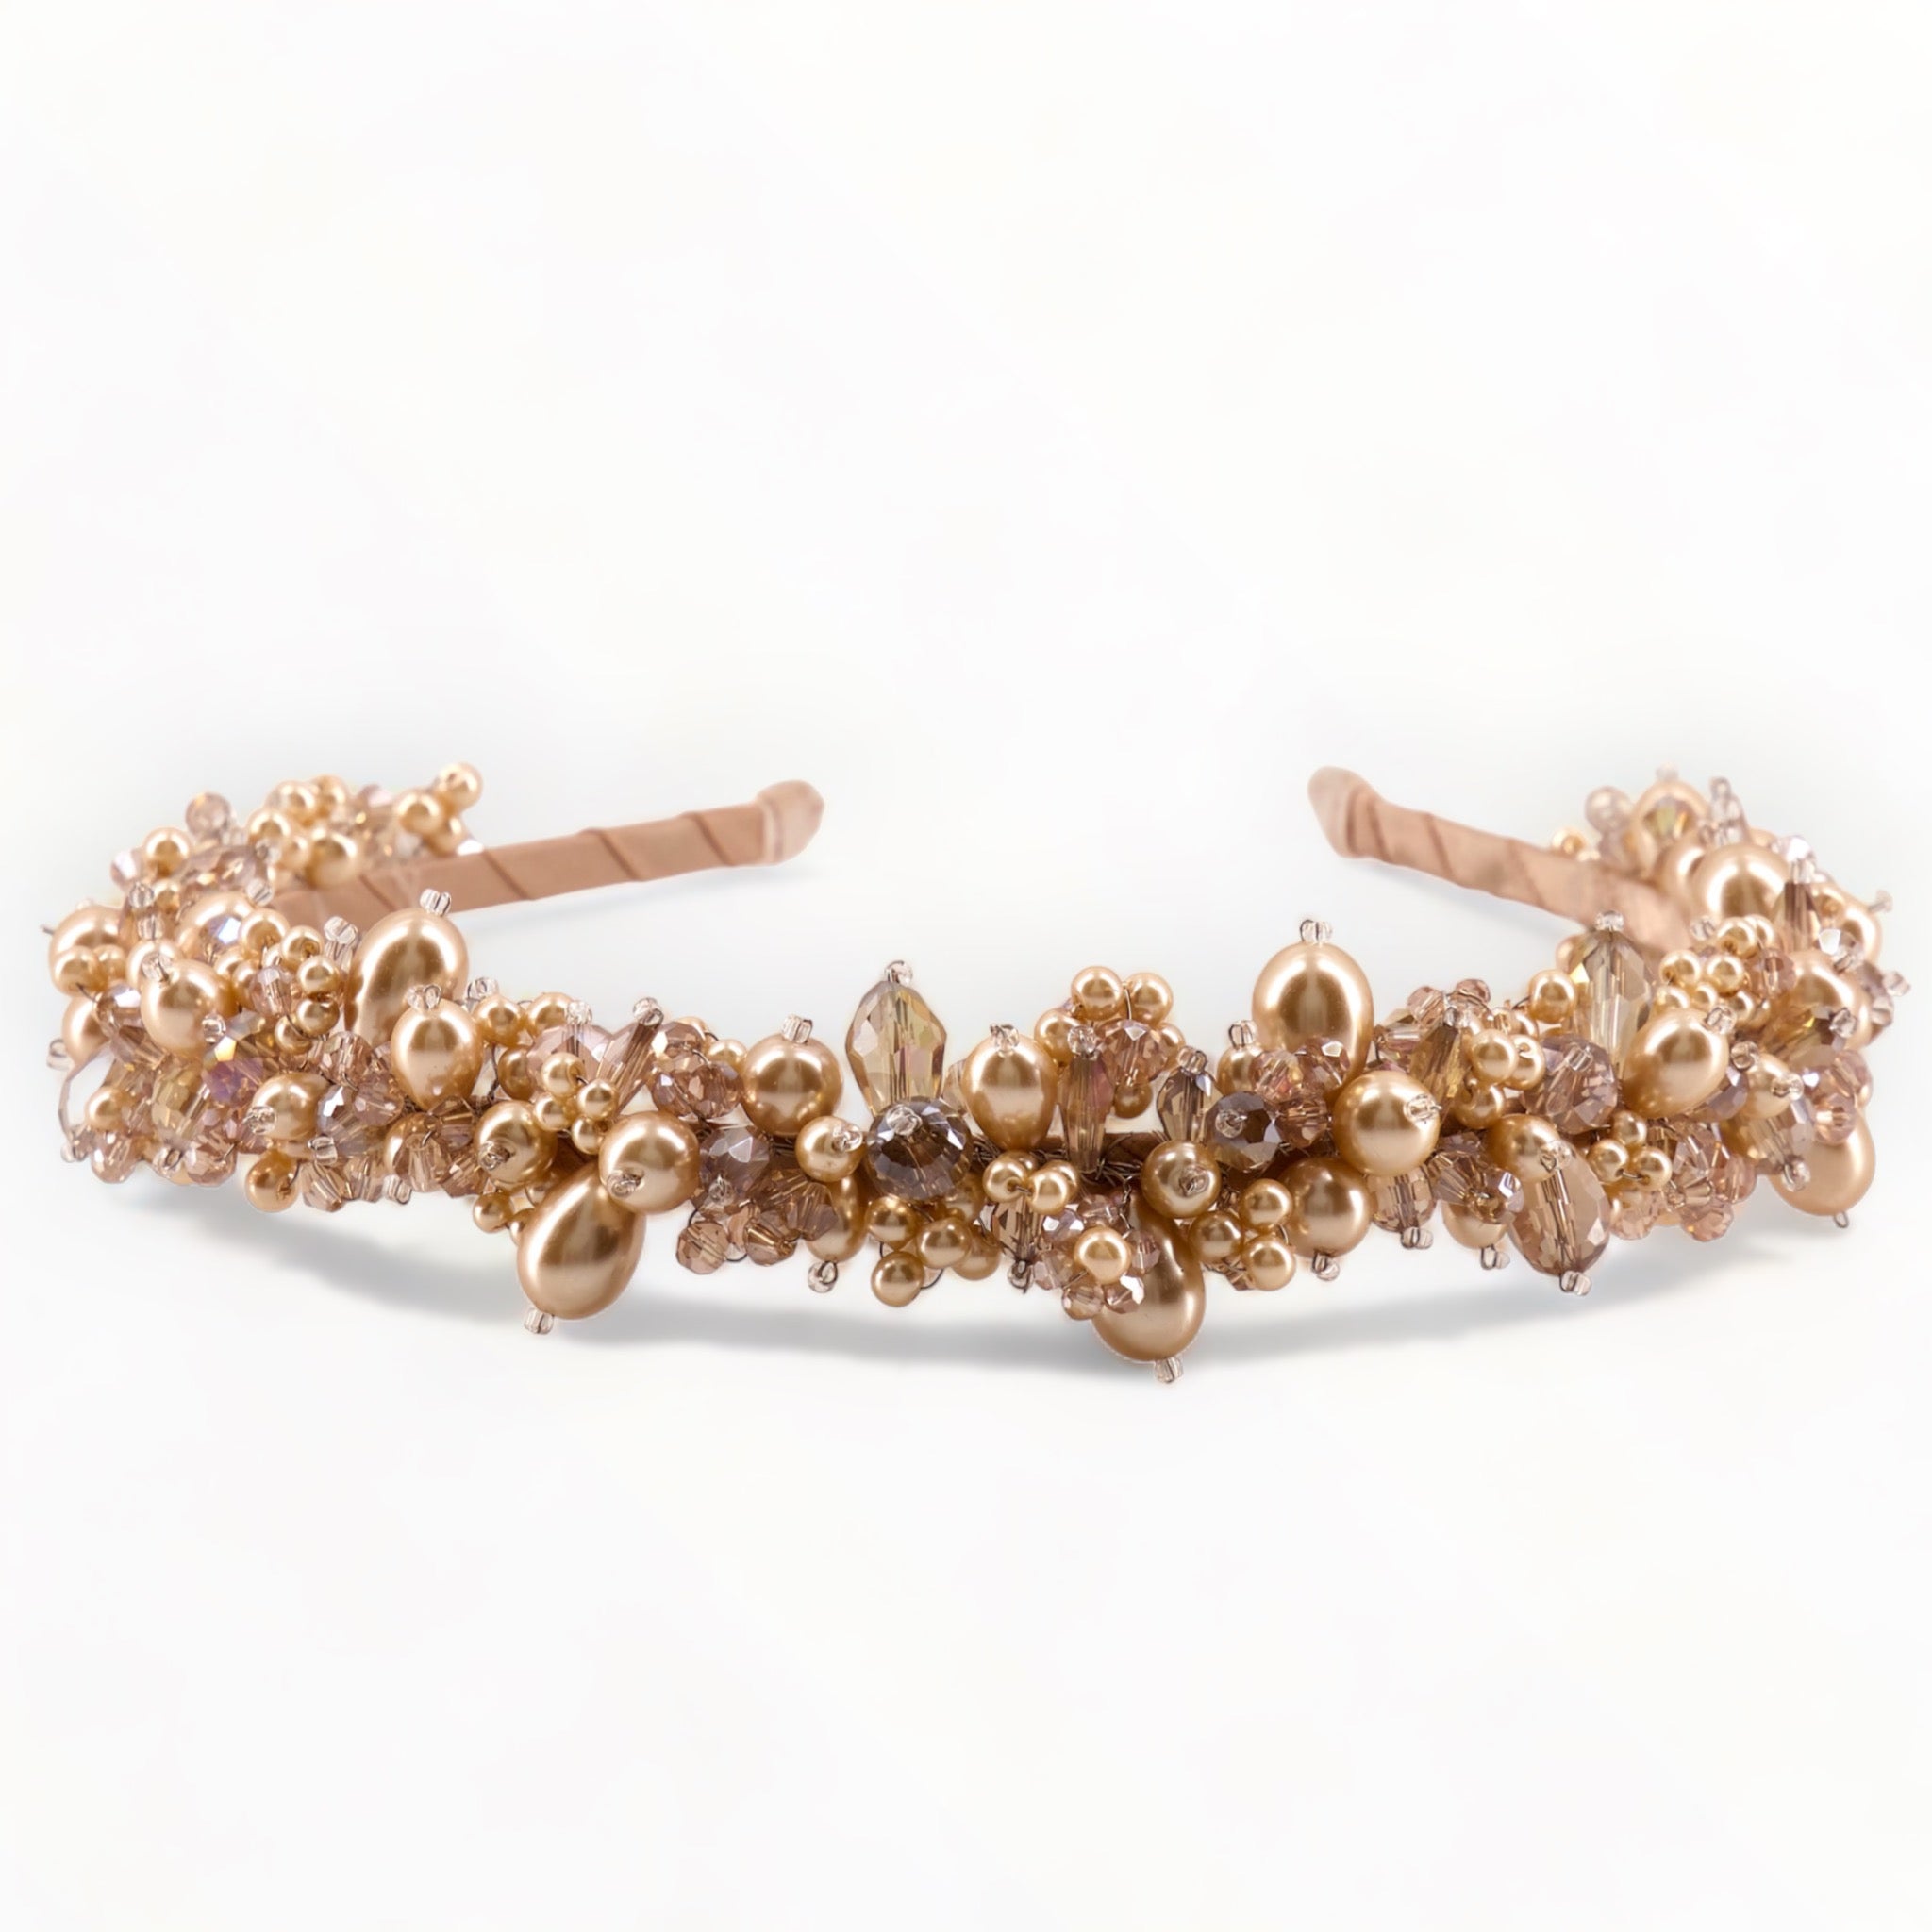 Hair accessories gold  Ambrosia Crystal & Pearl Girls Headband – Sienna  Likes To Party - Shop